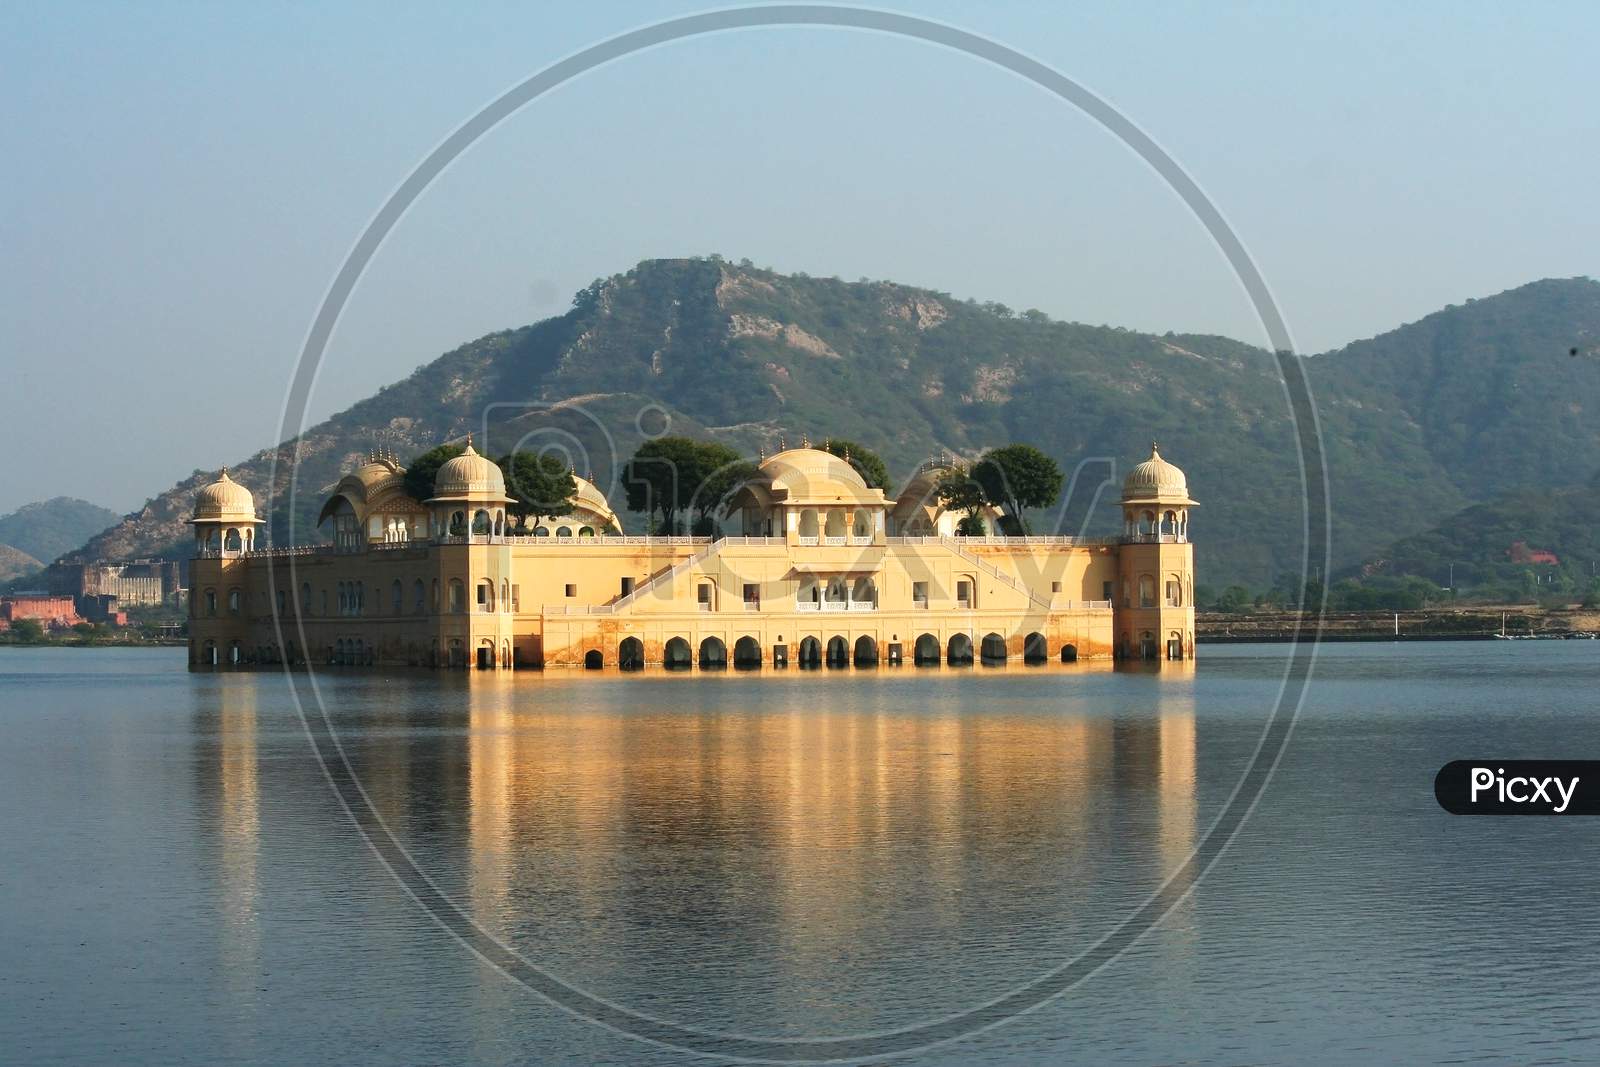 Jal Mahal a palace in the middle of the Man Sagar Lake in Jaipur city, Rajasthan